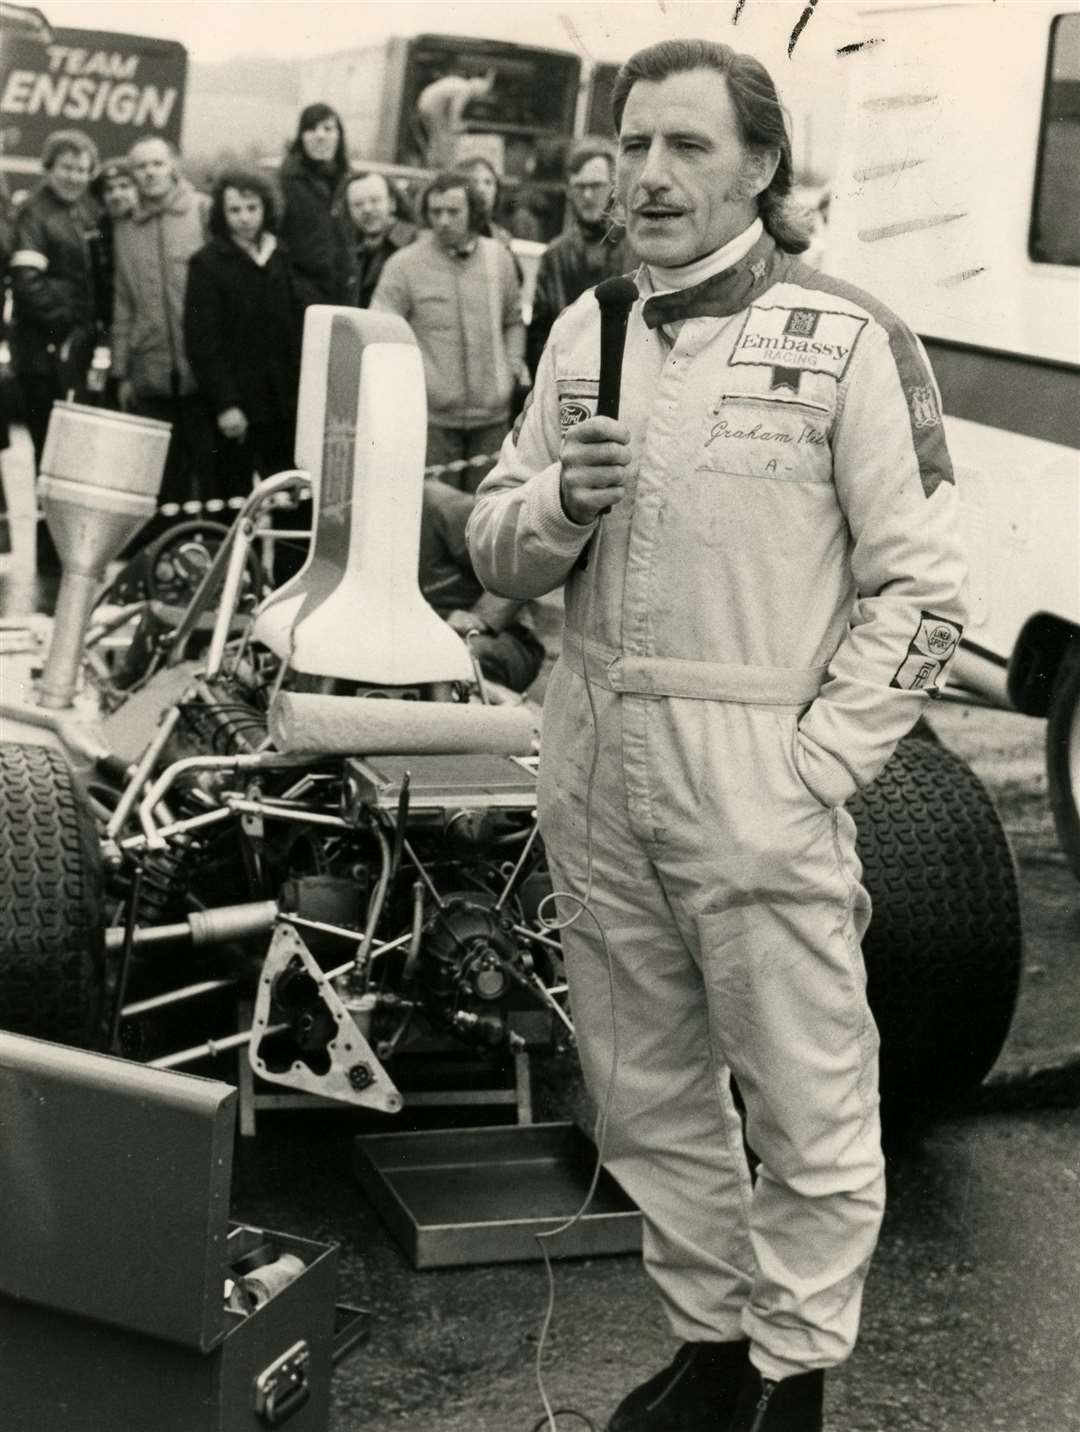 Graham Hill introduces an edition of the Disney Time programme from Brands Hatch in 1974. He remains the only driver to have won motorsport's triple crown: Le Mans, Monaco and the Indy 500